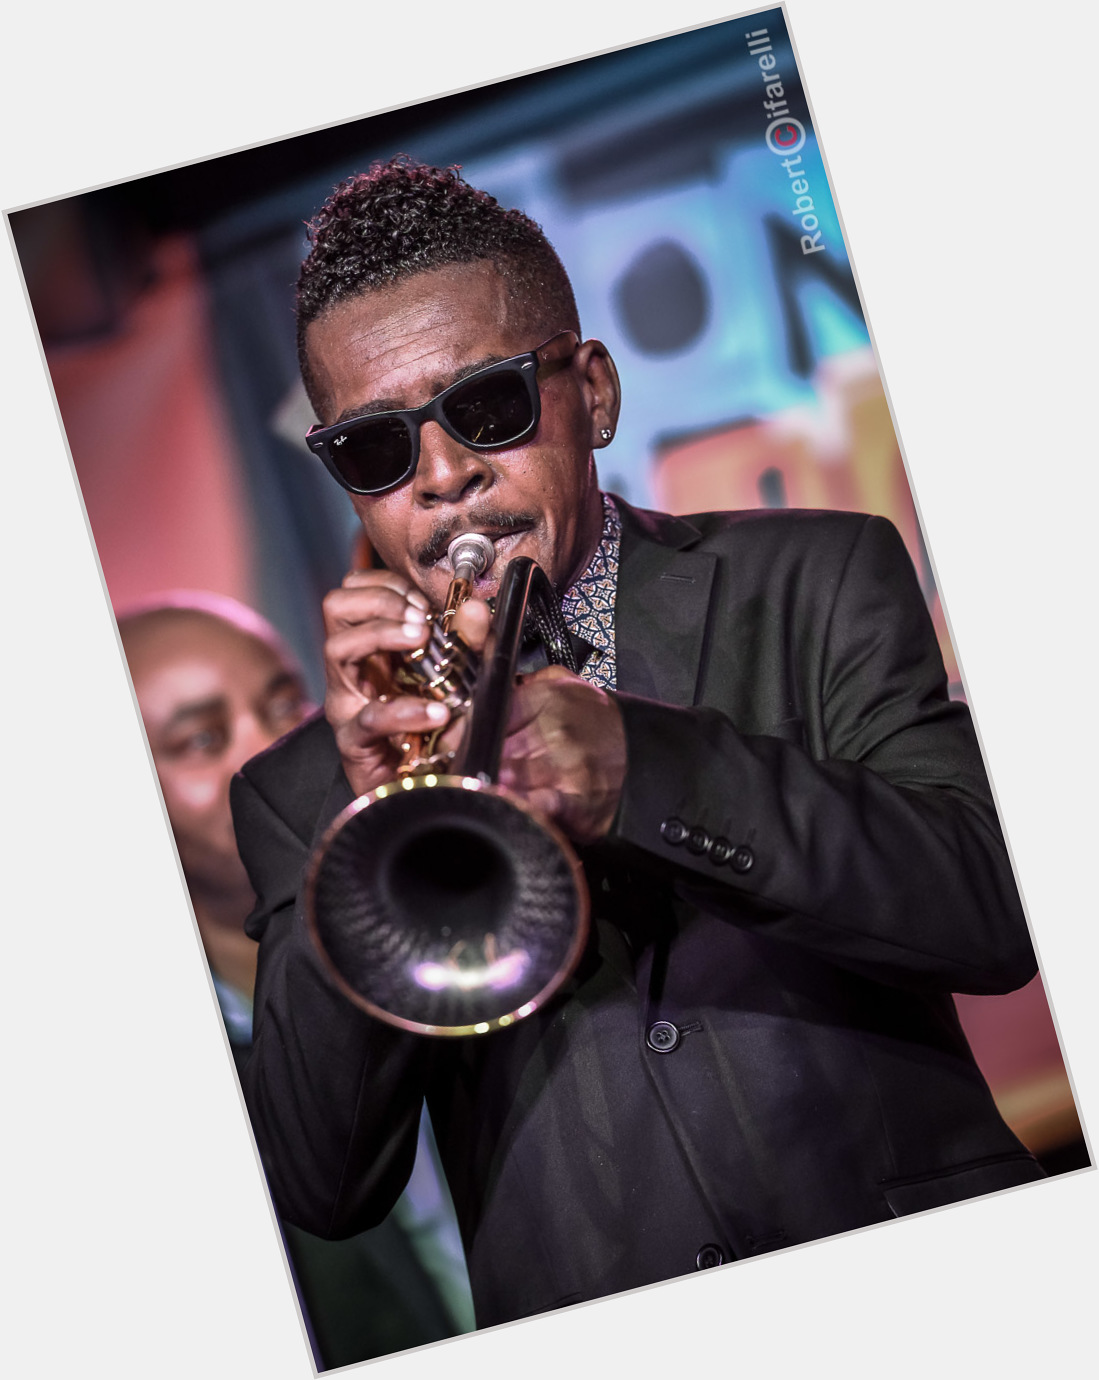 Http://fanpagepress.net/m/R/Roy Hargrove New Pic 1